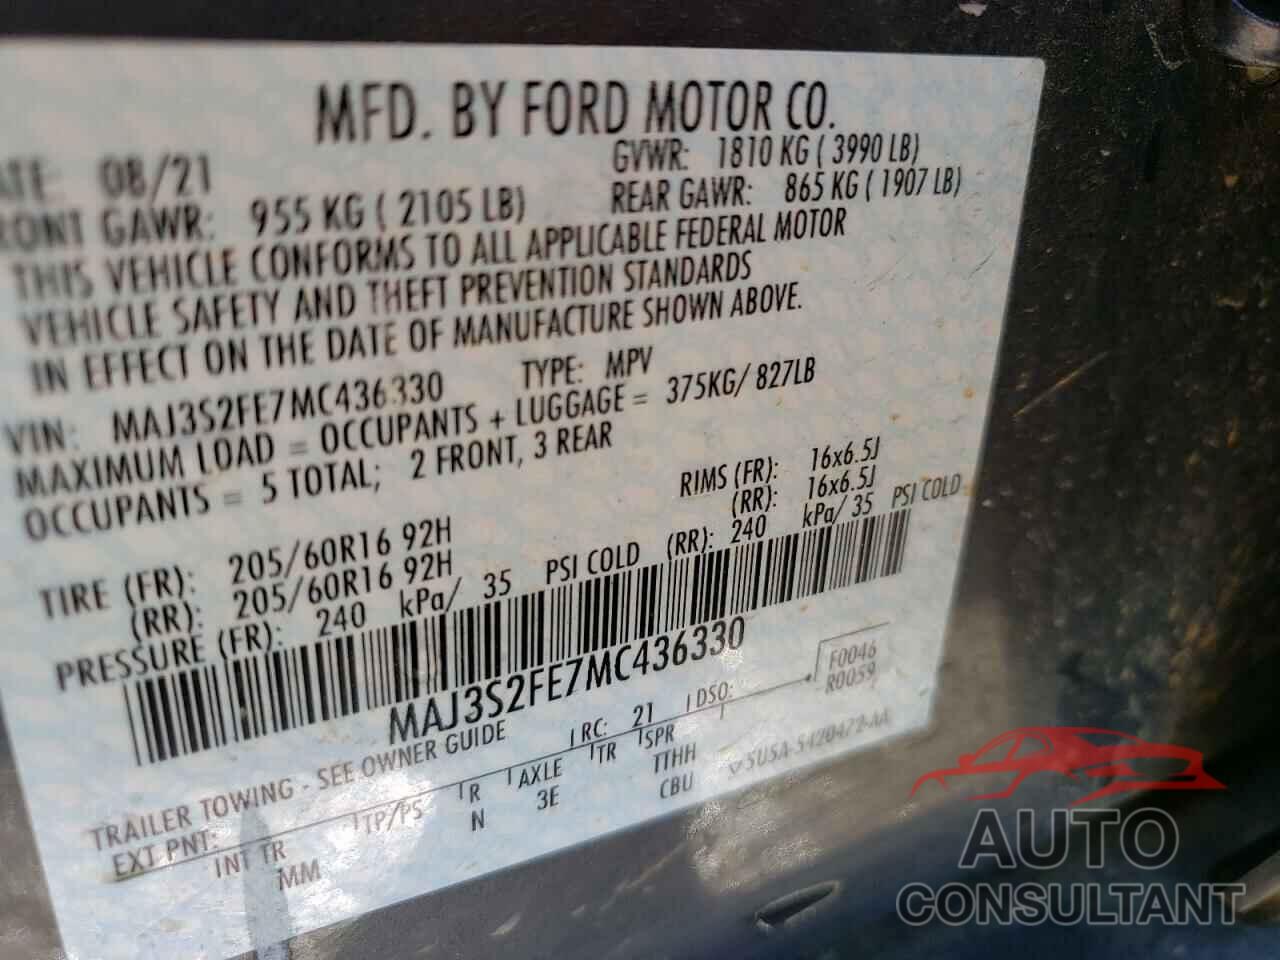 FORD ALL OTHER 2021 - MAJ3S2FE7MC436330